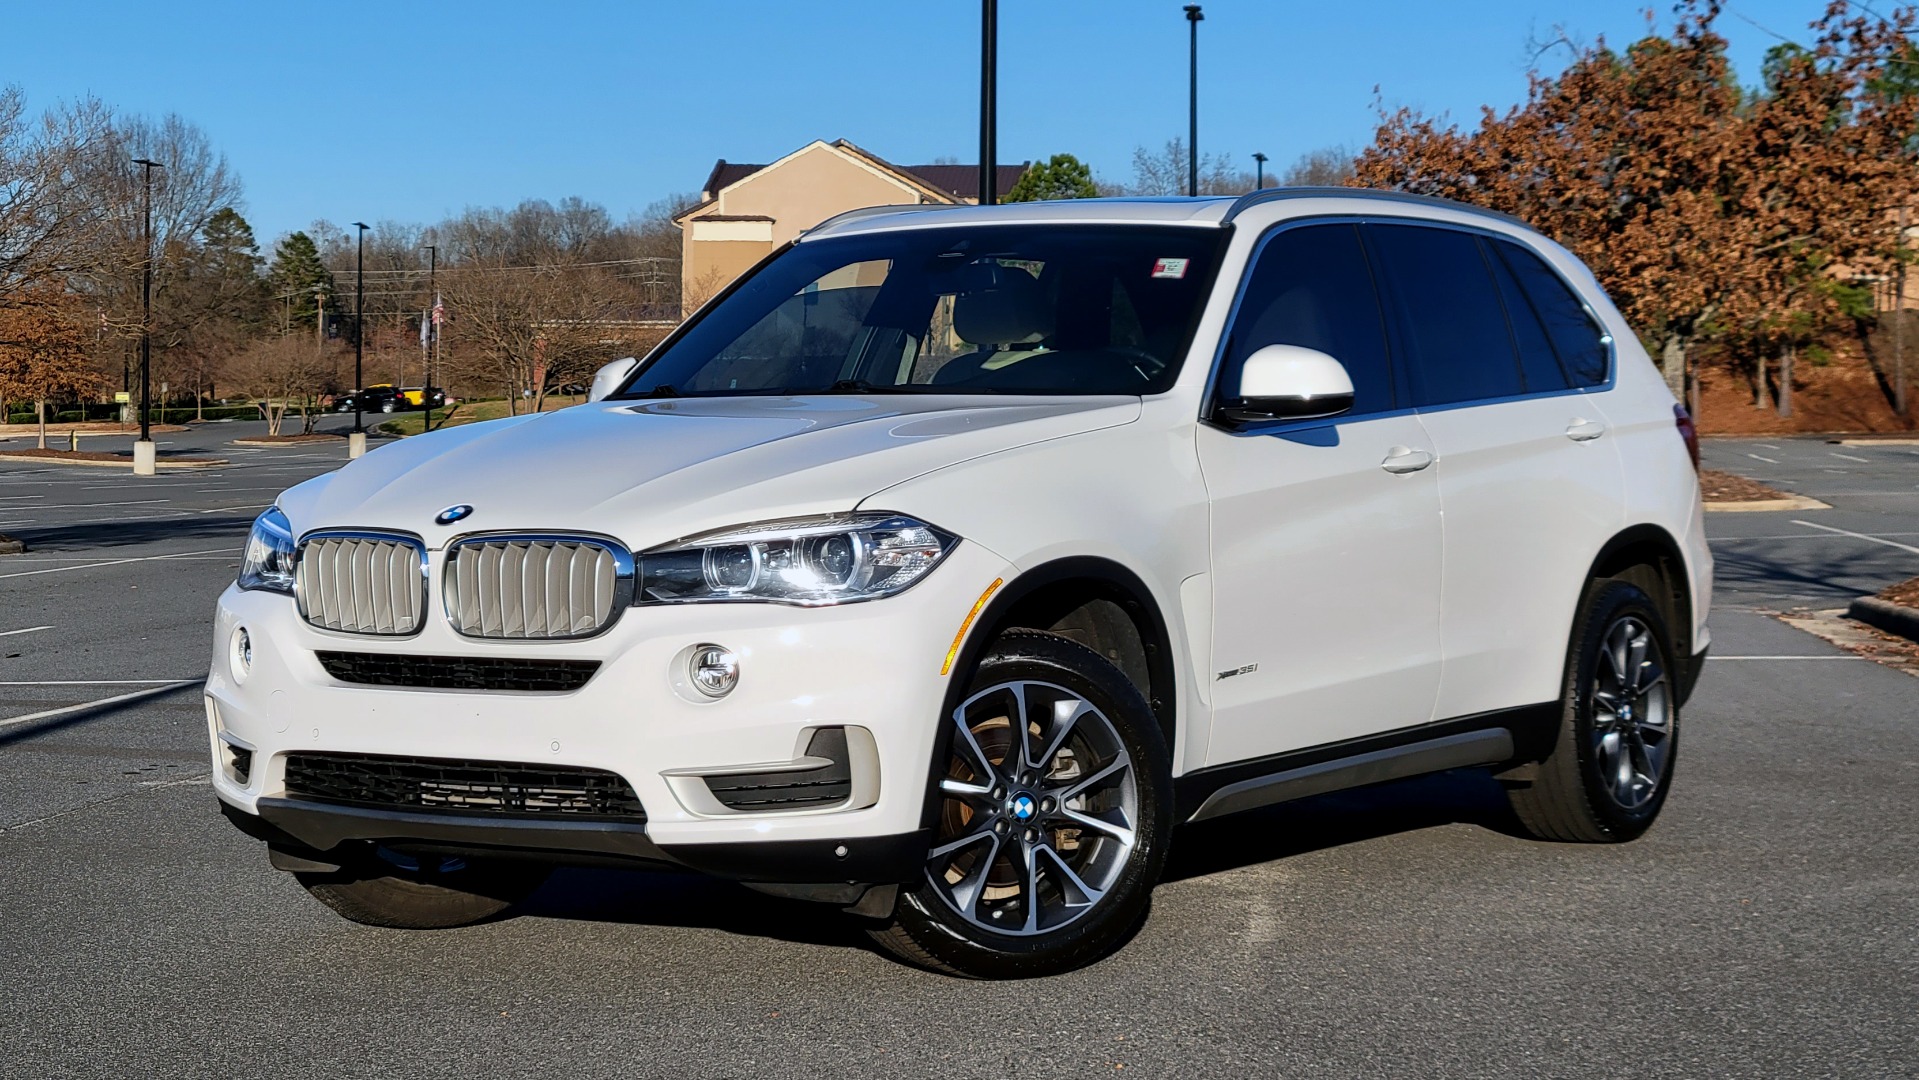 Used 2018 BMW X5 XDRIVE35I PREMIUM / DRVR ASST / HUD / WIRELESS CHARGING / HEATED SEATS for sale $42,995 at Formula Imports in Charlotte NC 28227 1